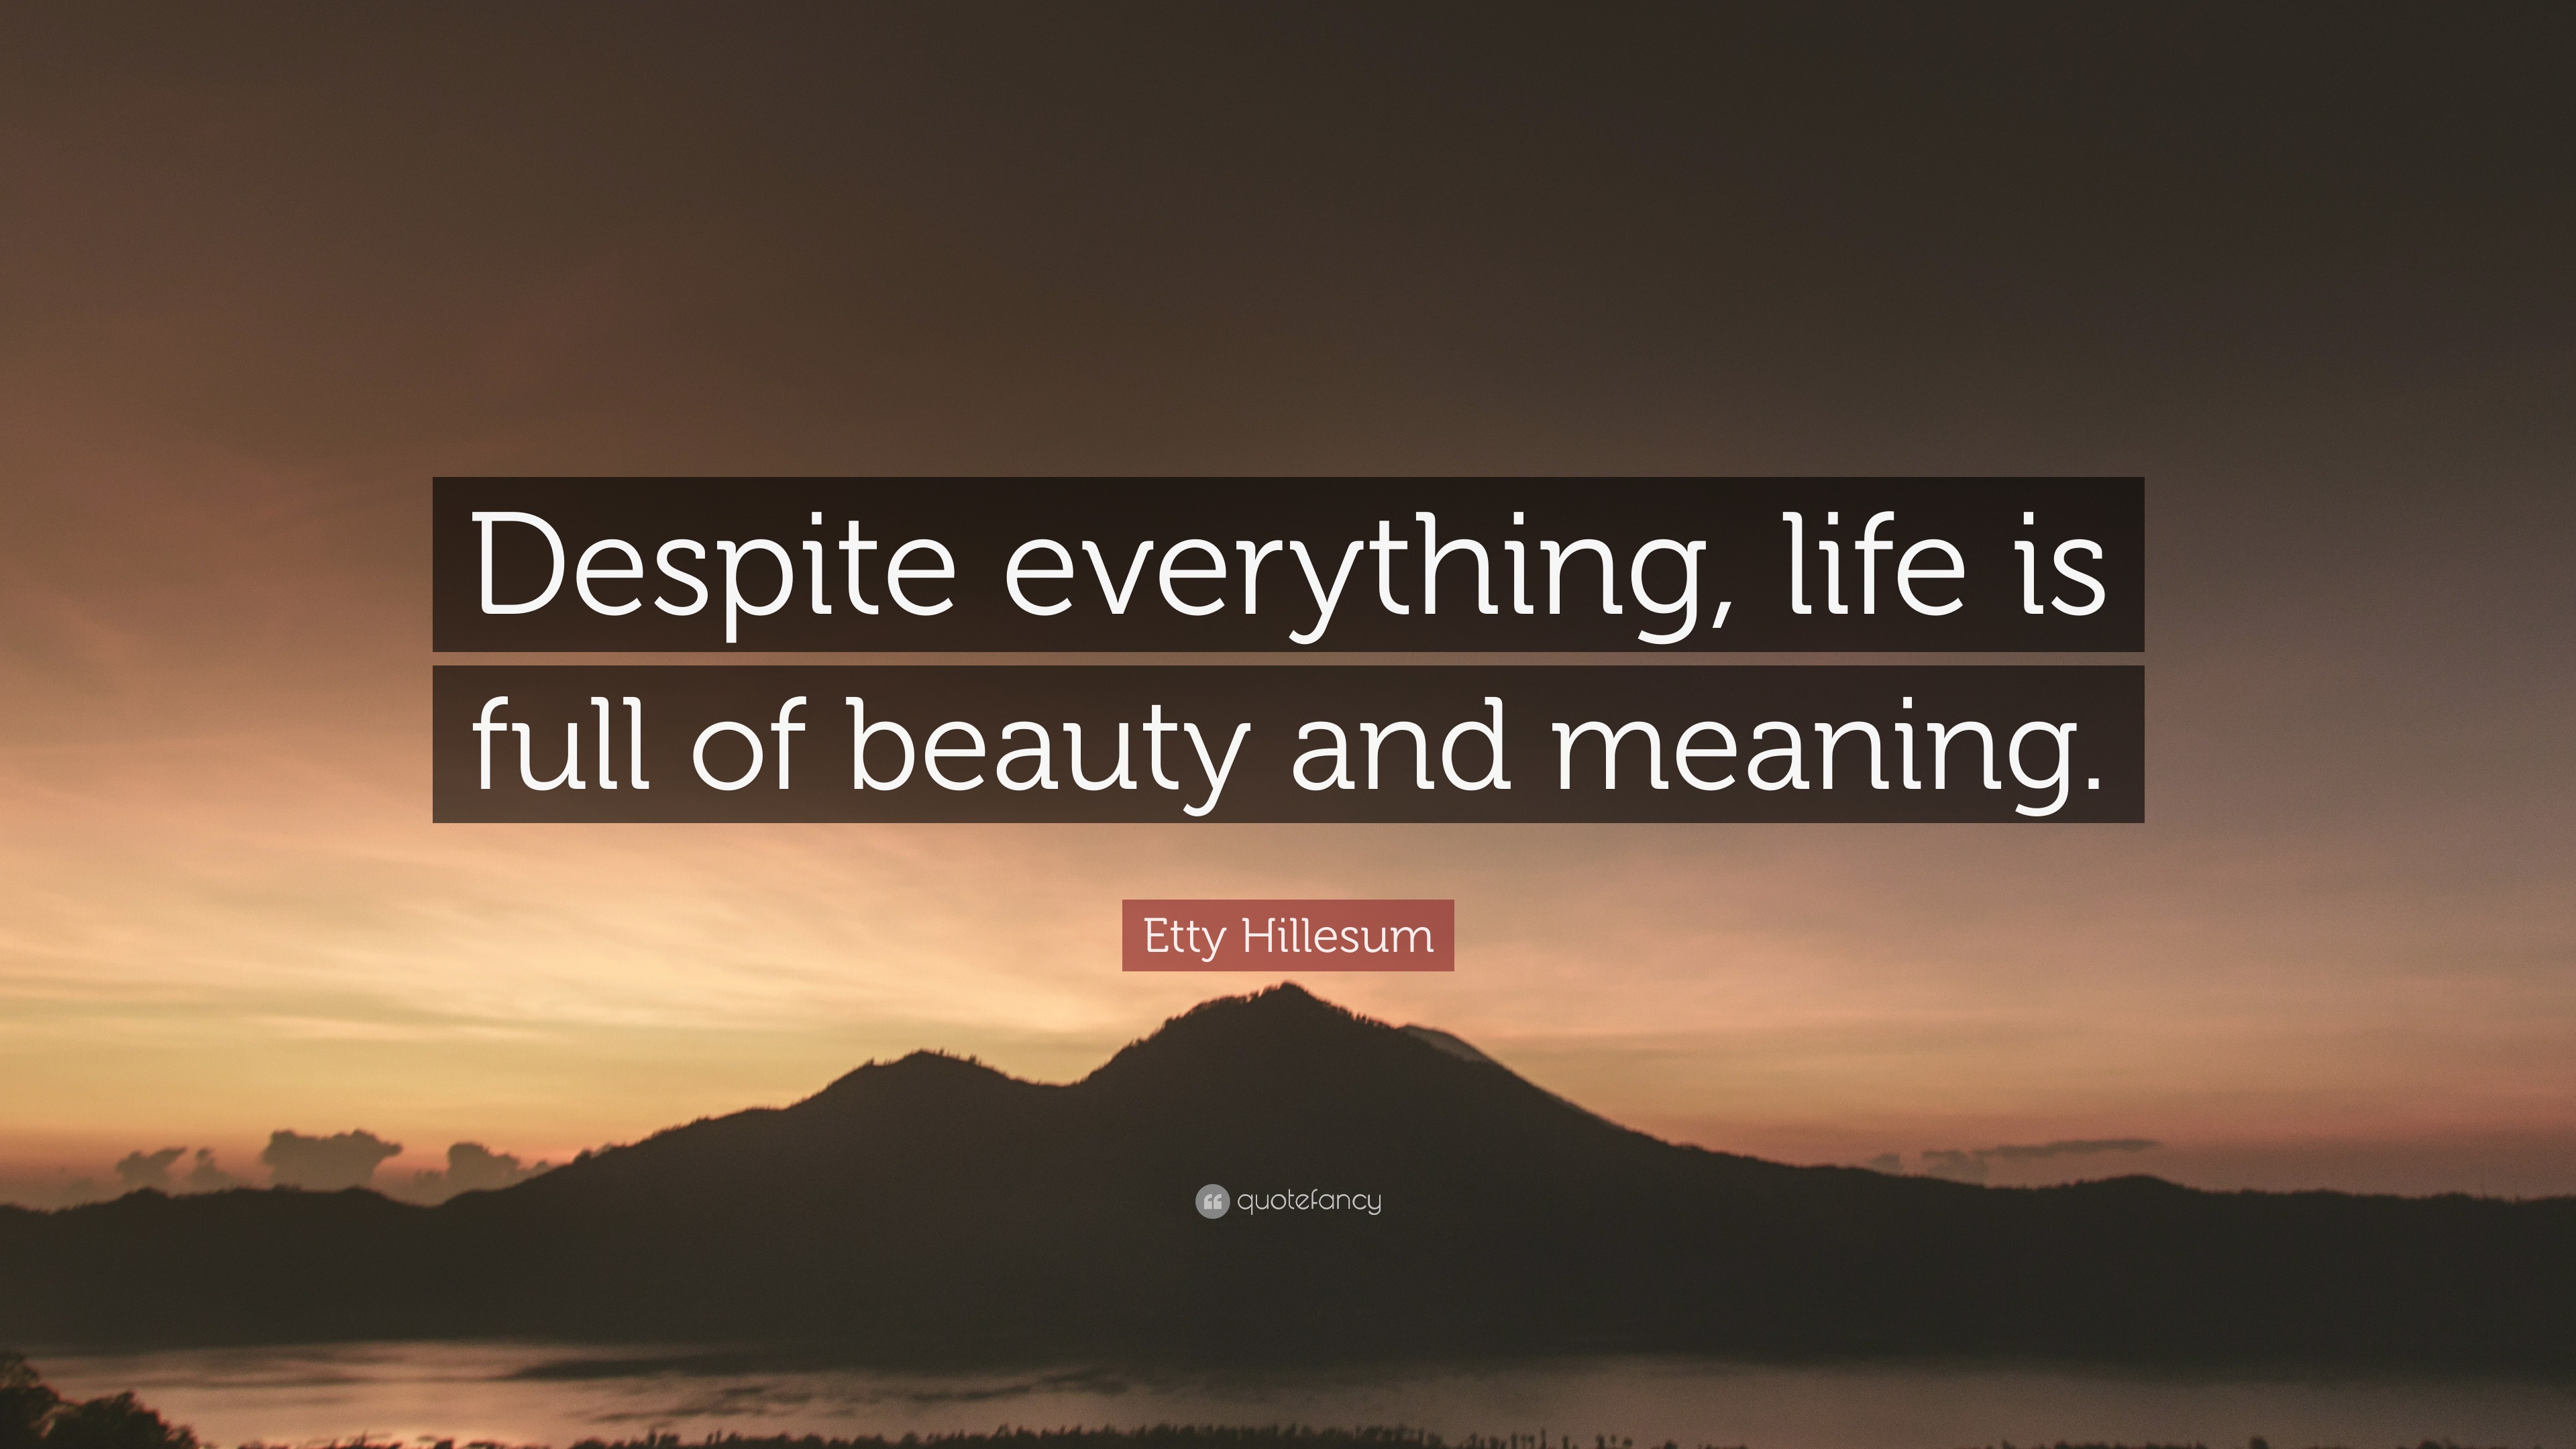 Etty Hillesum Quote “Despite everything life is full of beauty and meaning